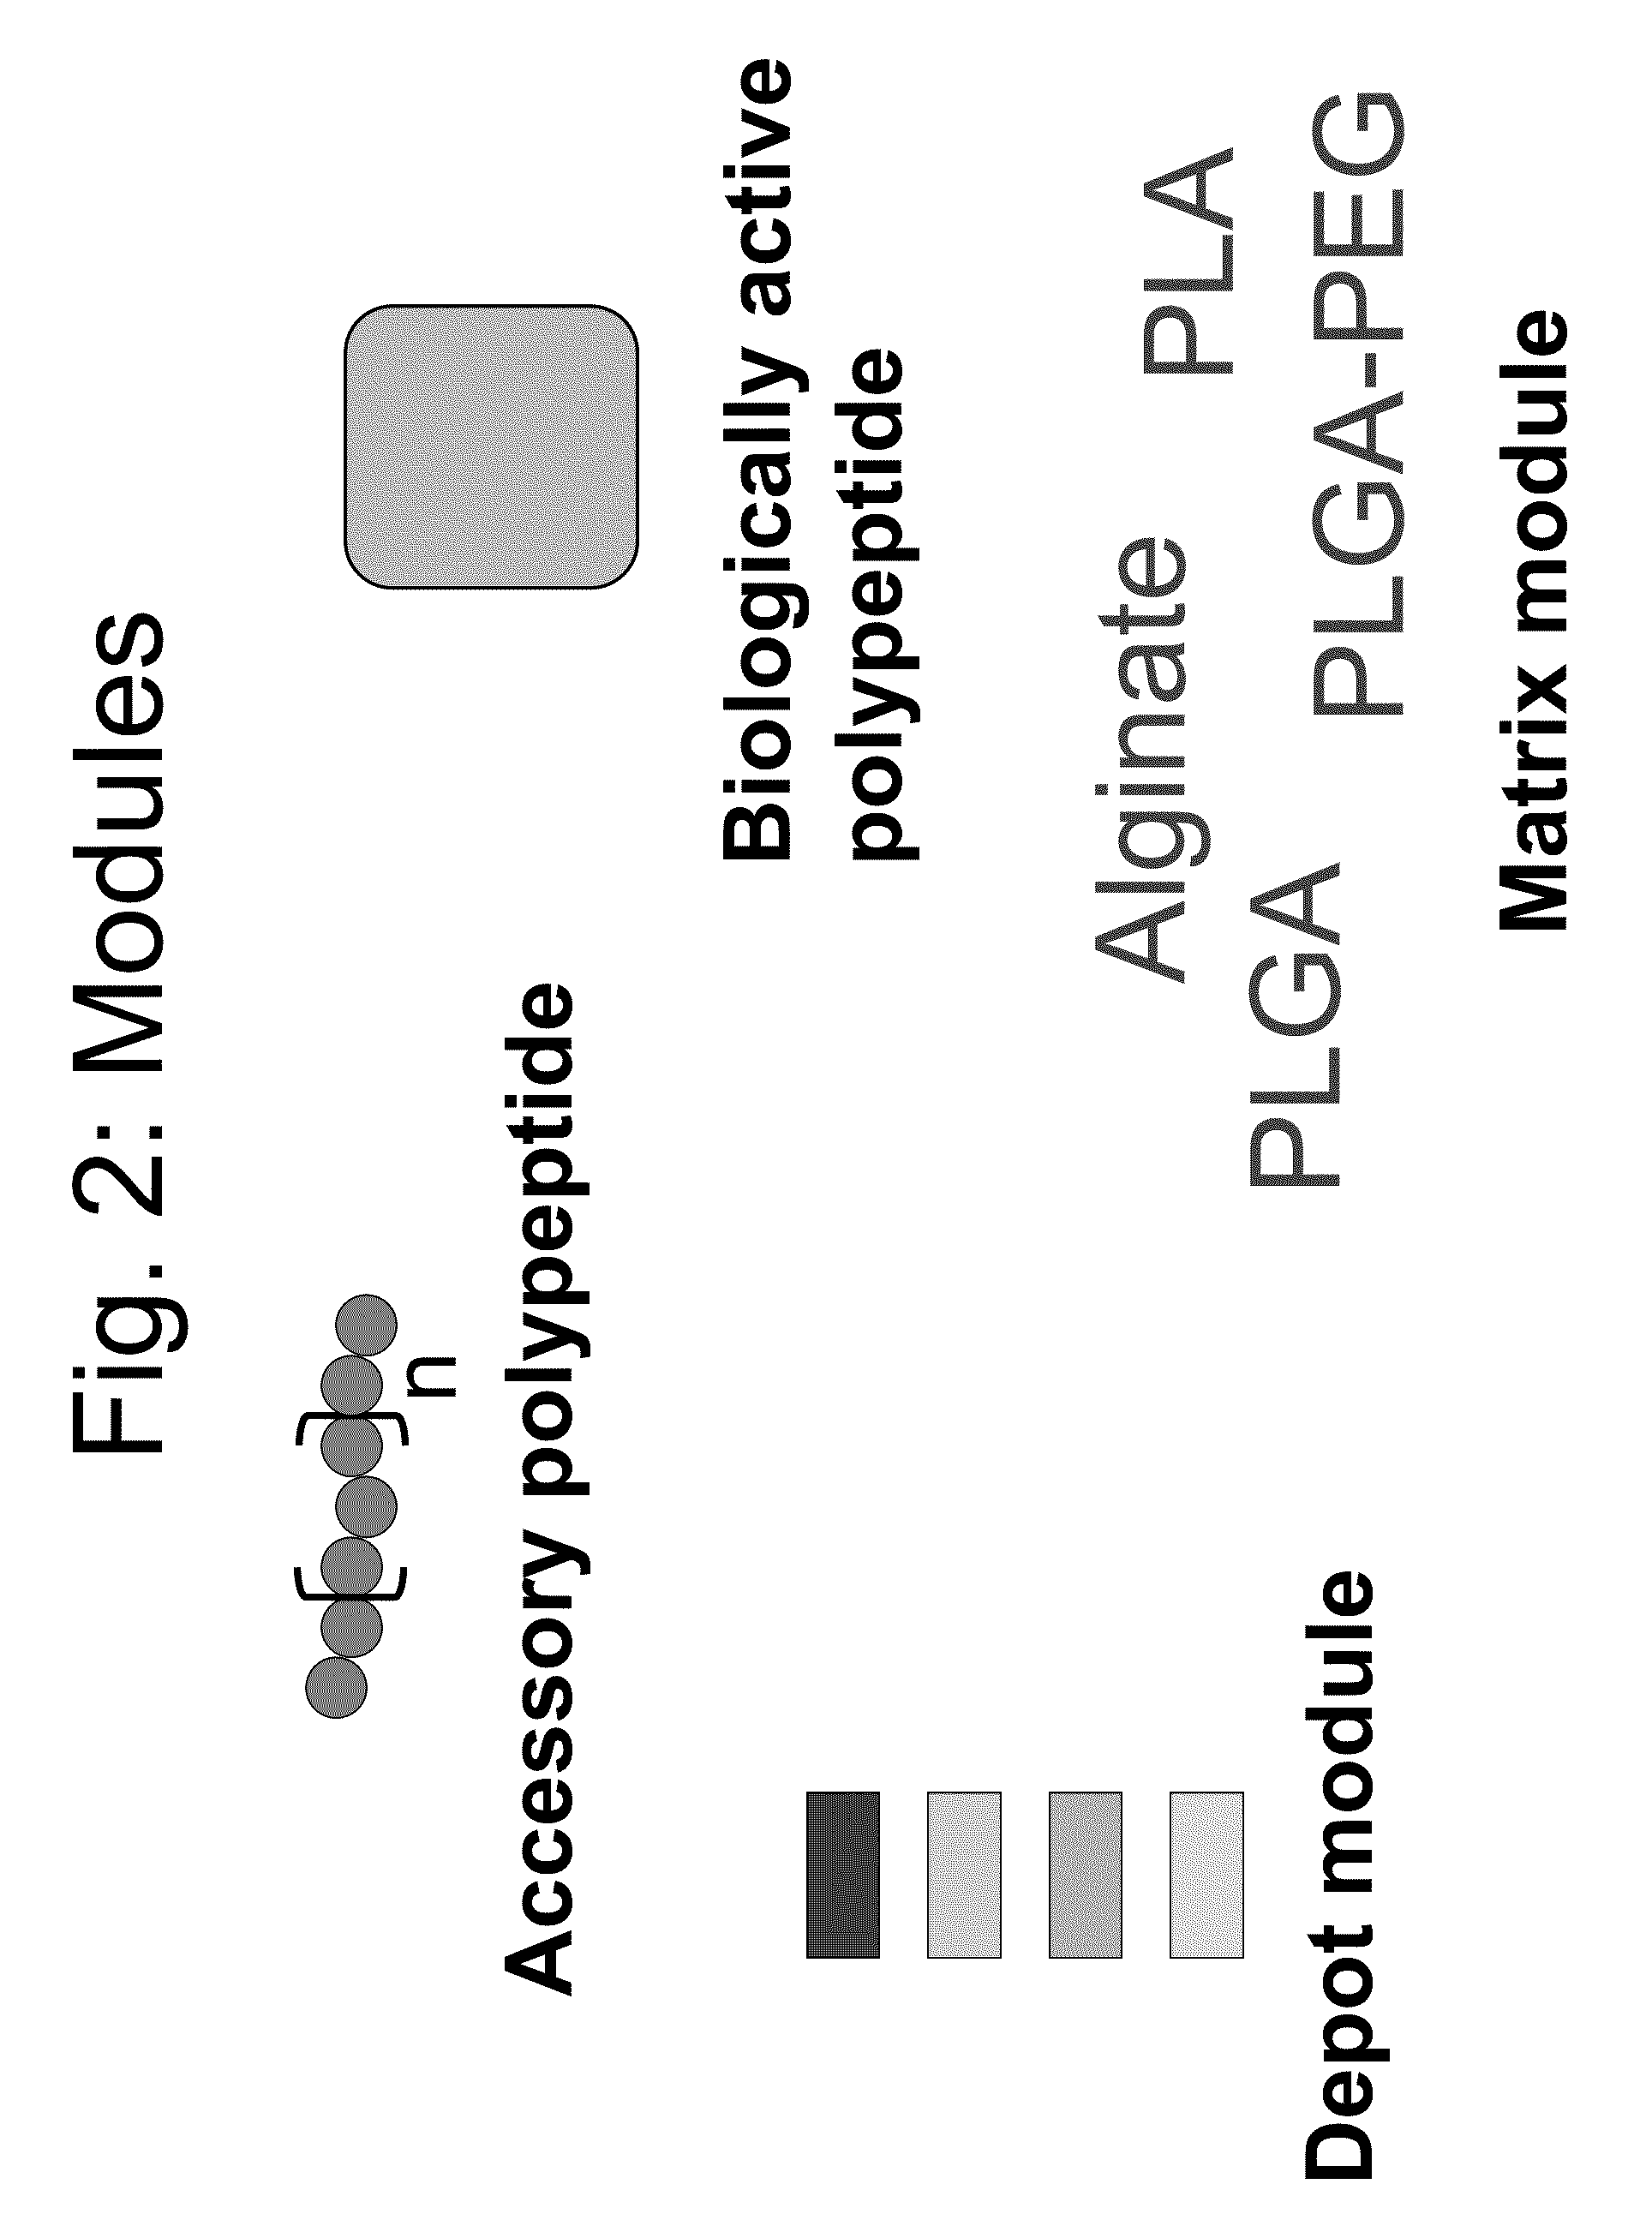 Compositions and methods for modifying properties of biologically active polypeptides